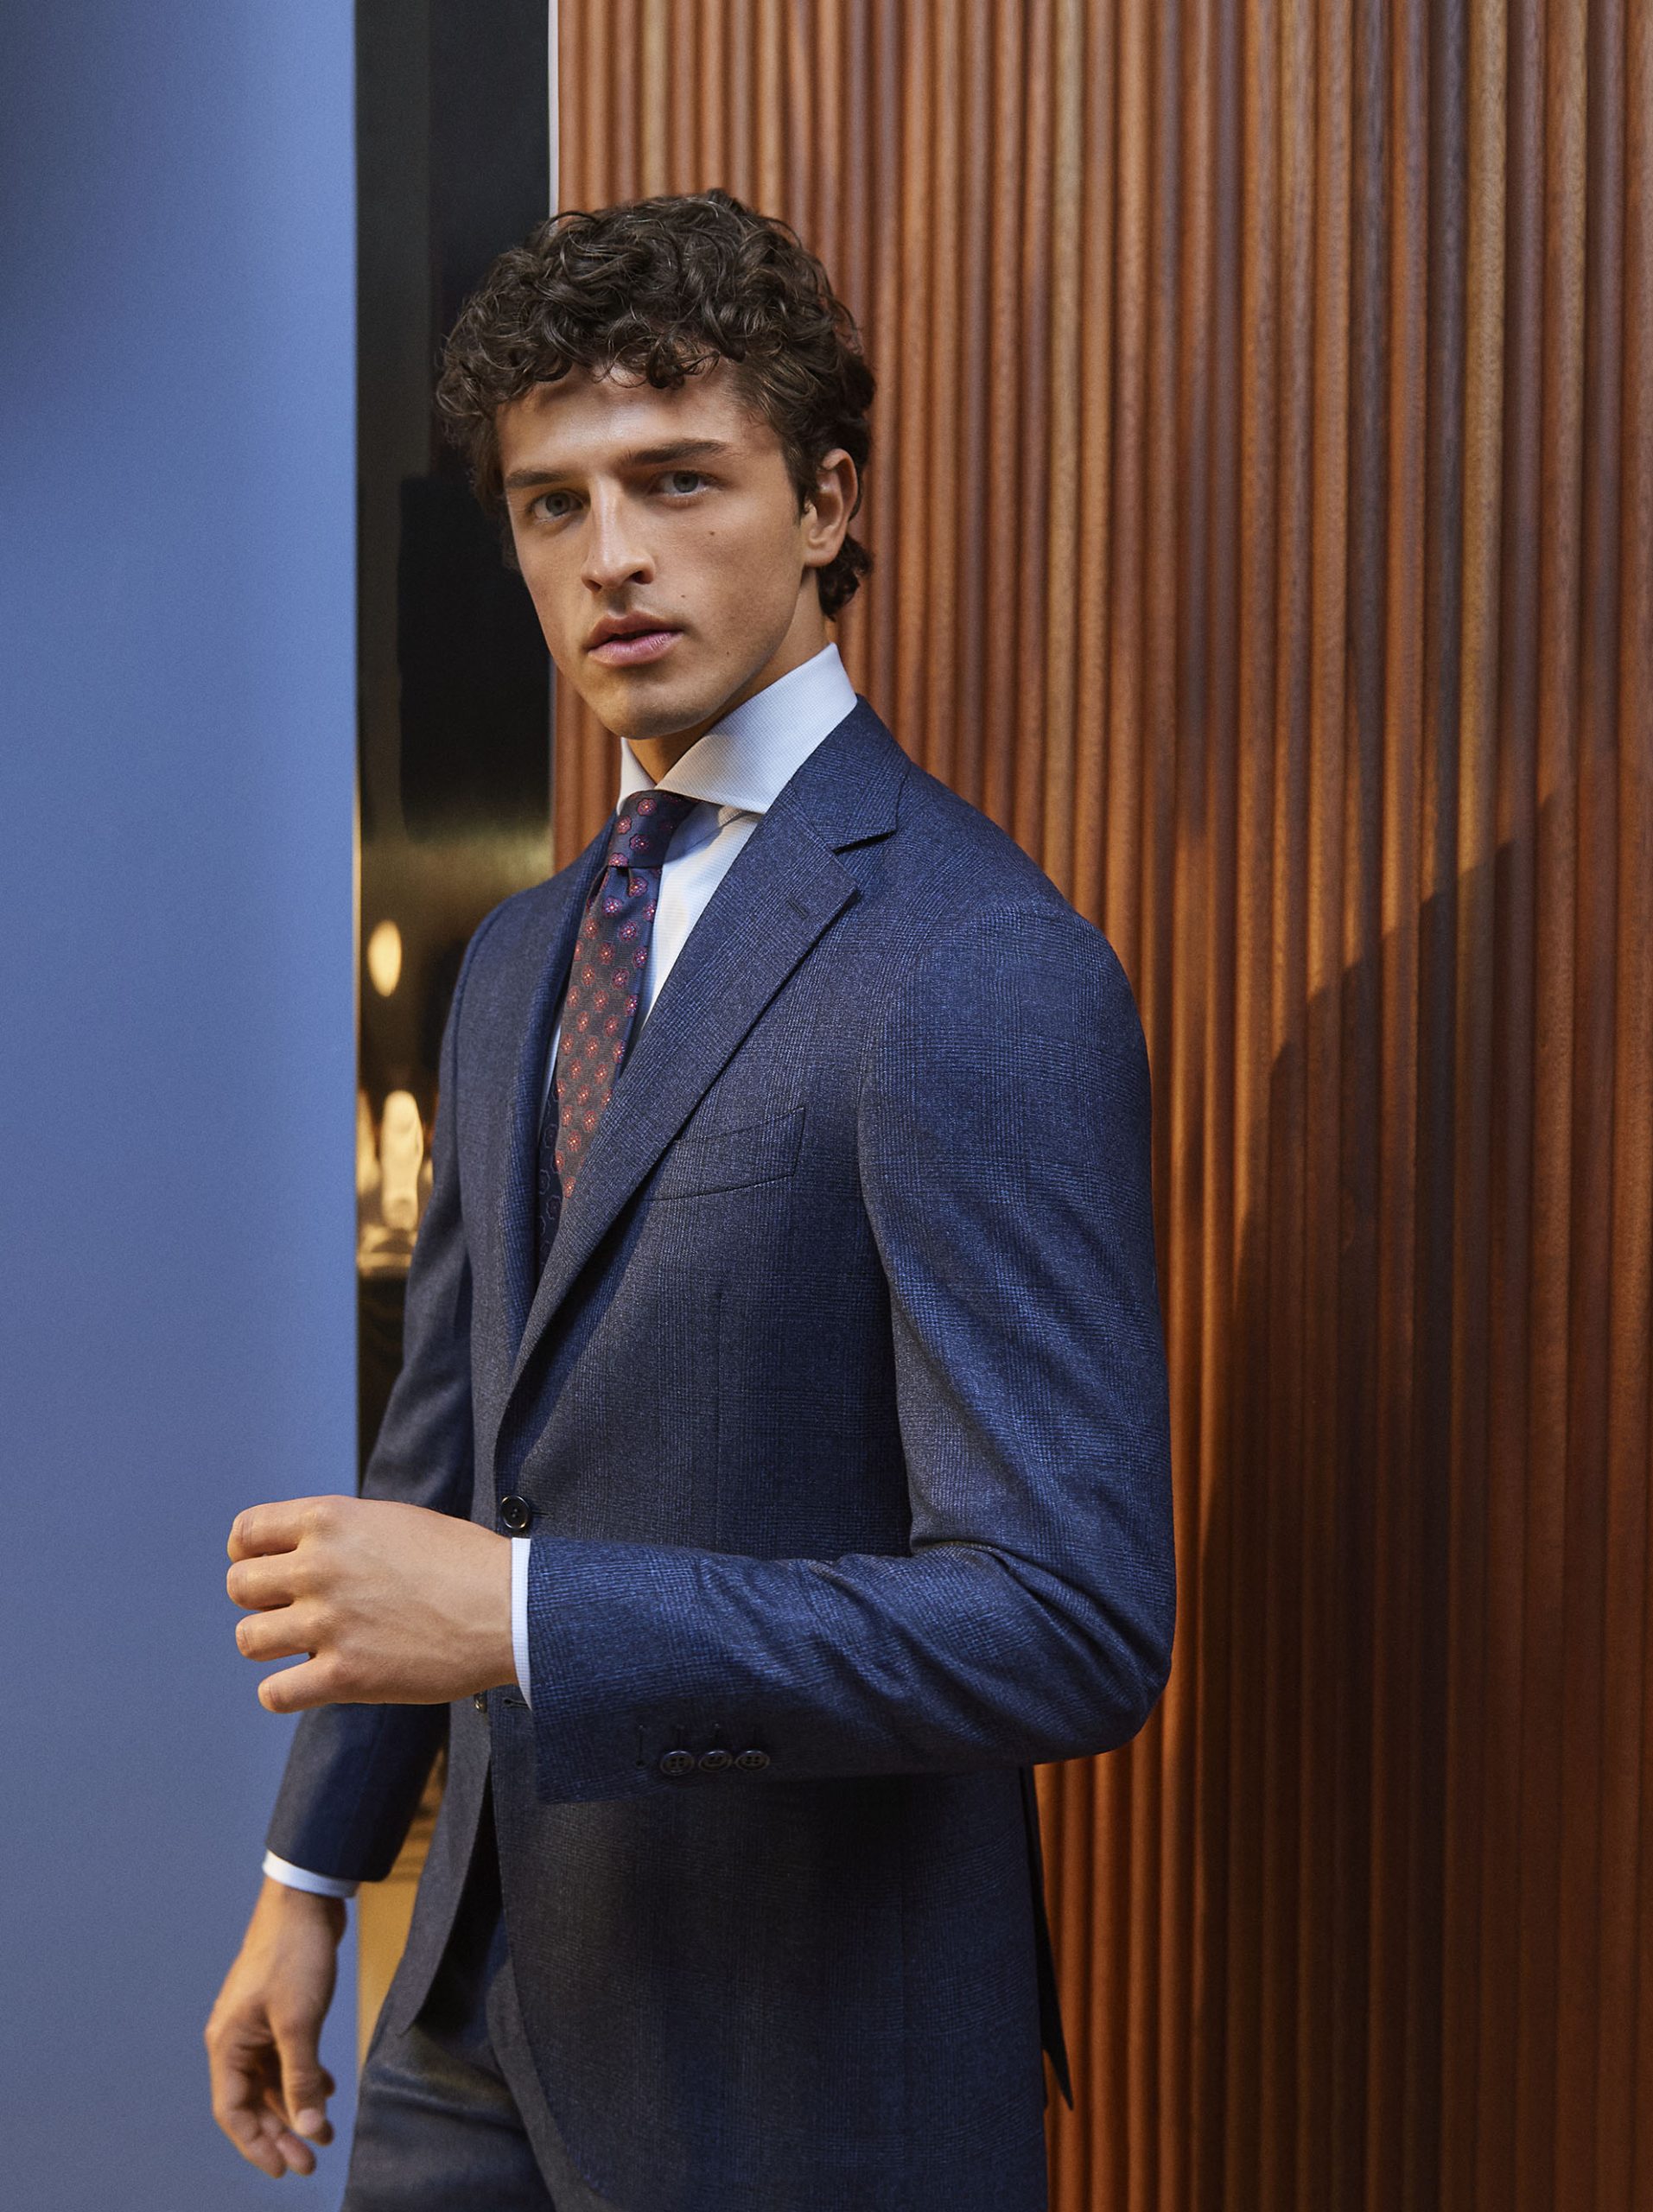 Canali Introduces Me by Canali | The Impression